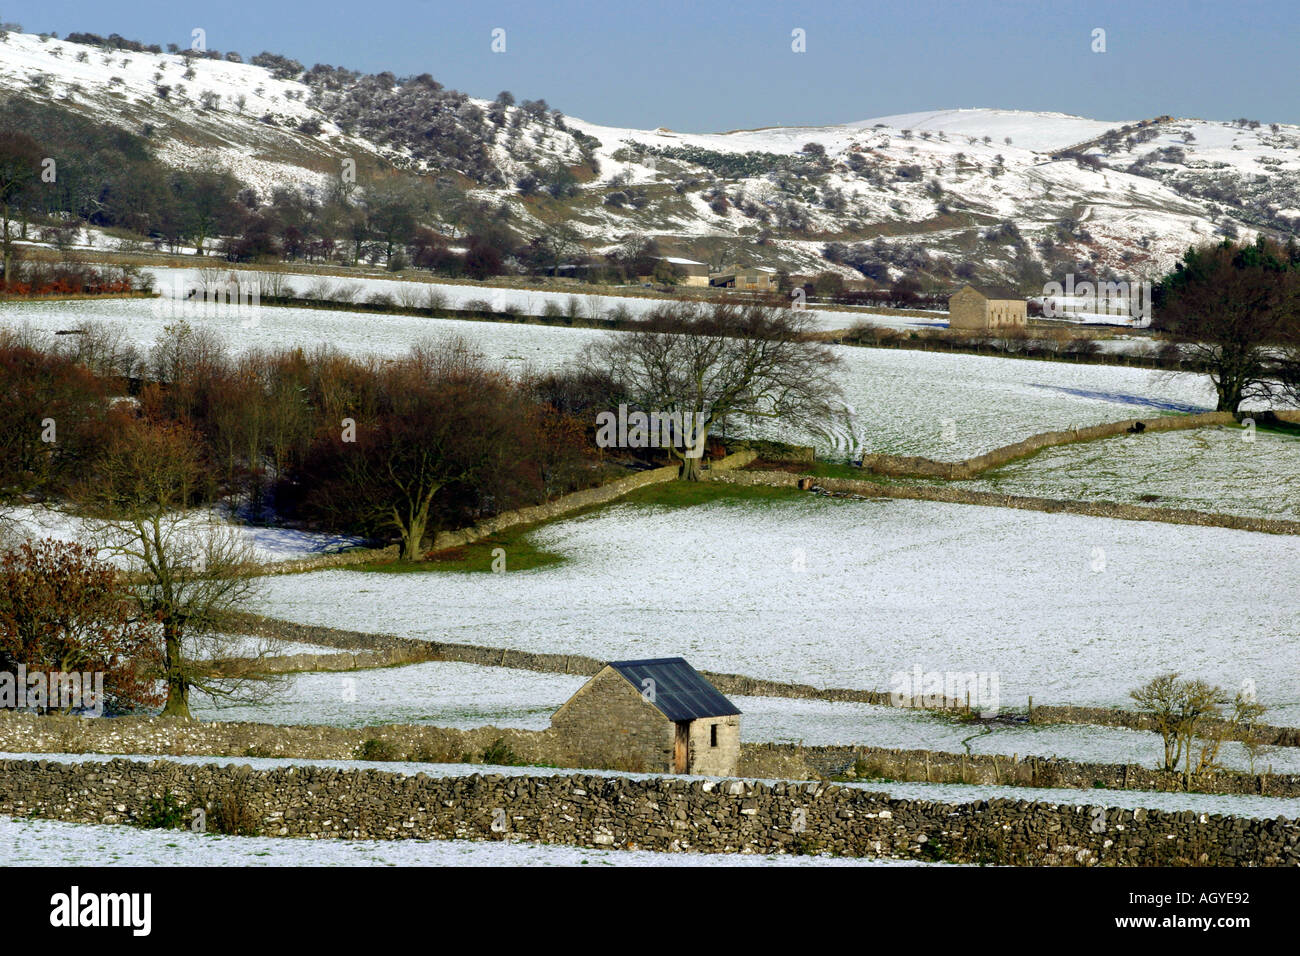 Snow covered landscape near Monsal Head in the Derbyshire Peak District England Stock Photo